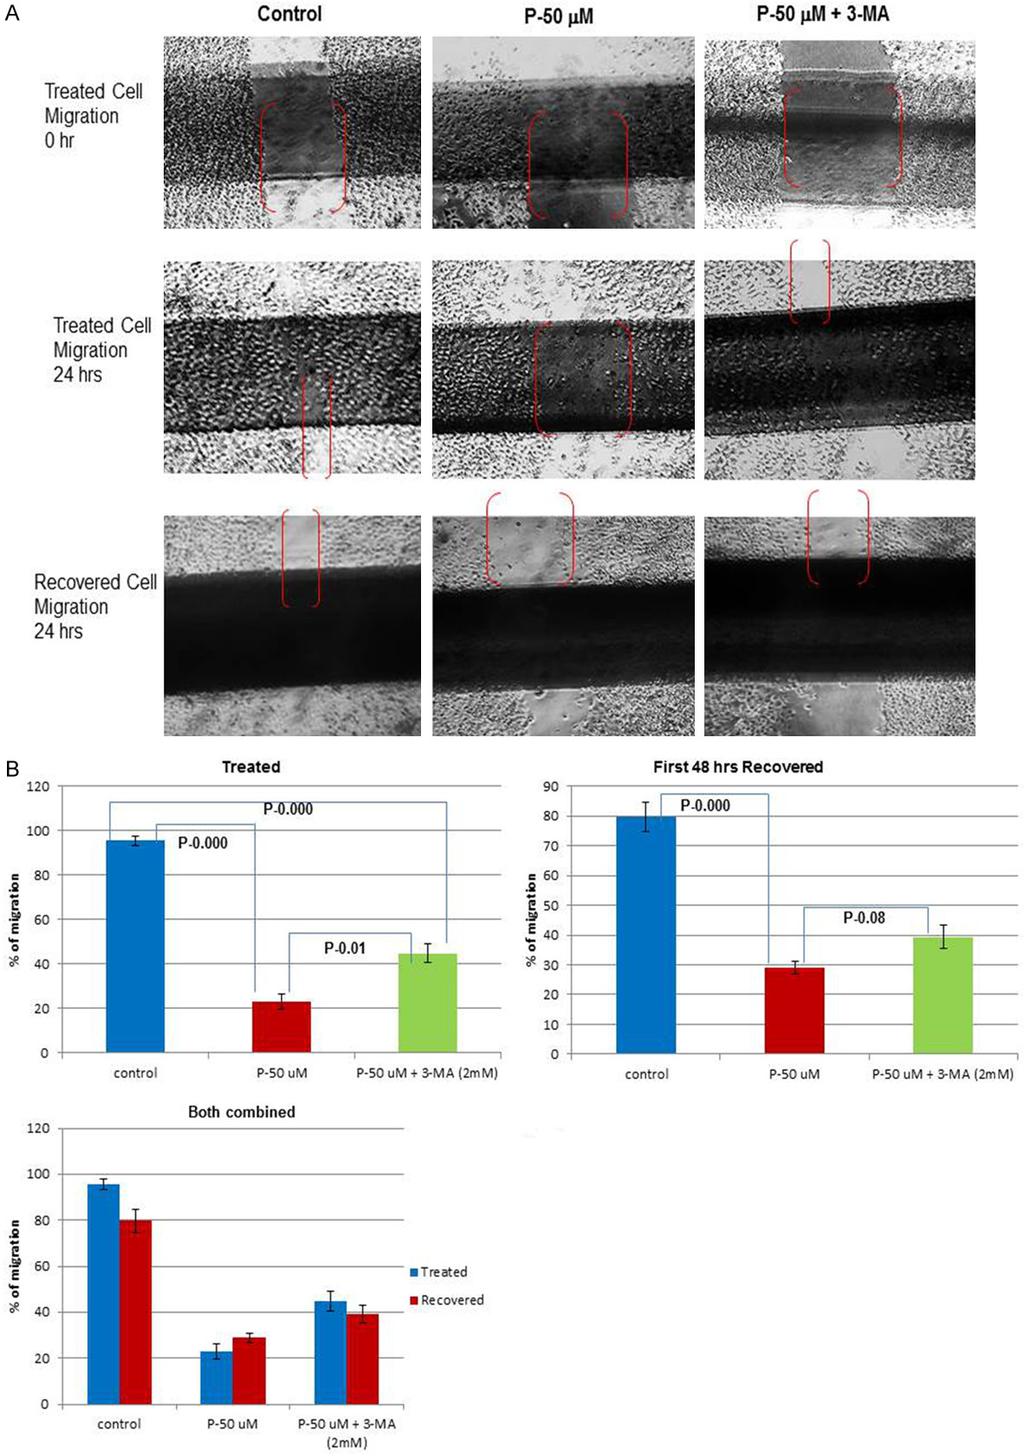 Figure 5. A. Treated, rescued and recovered cell migration function-cell pictures: Cell pictures clearly indicated the difference in migration between untreated control and P-50 um treated cells.